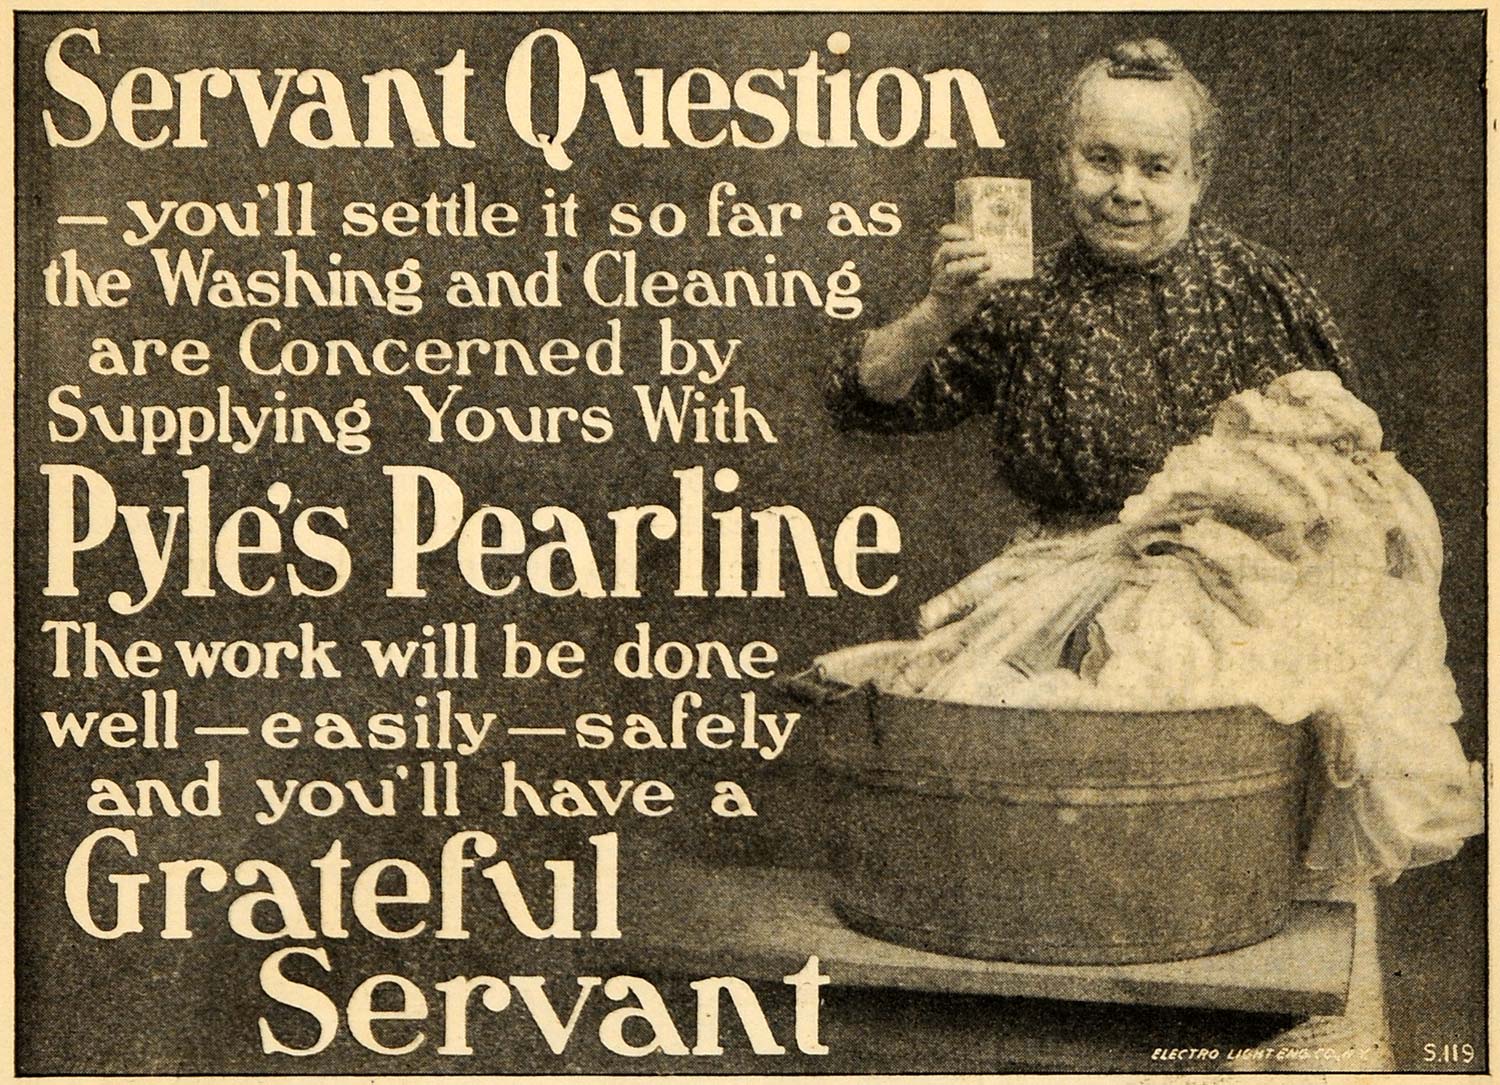 1904 Ad James Pyle Pearline Soap Detergent Washing Tub Laundry Clothes ARG1